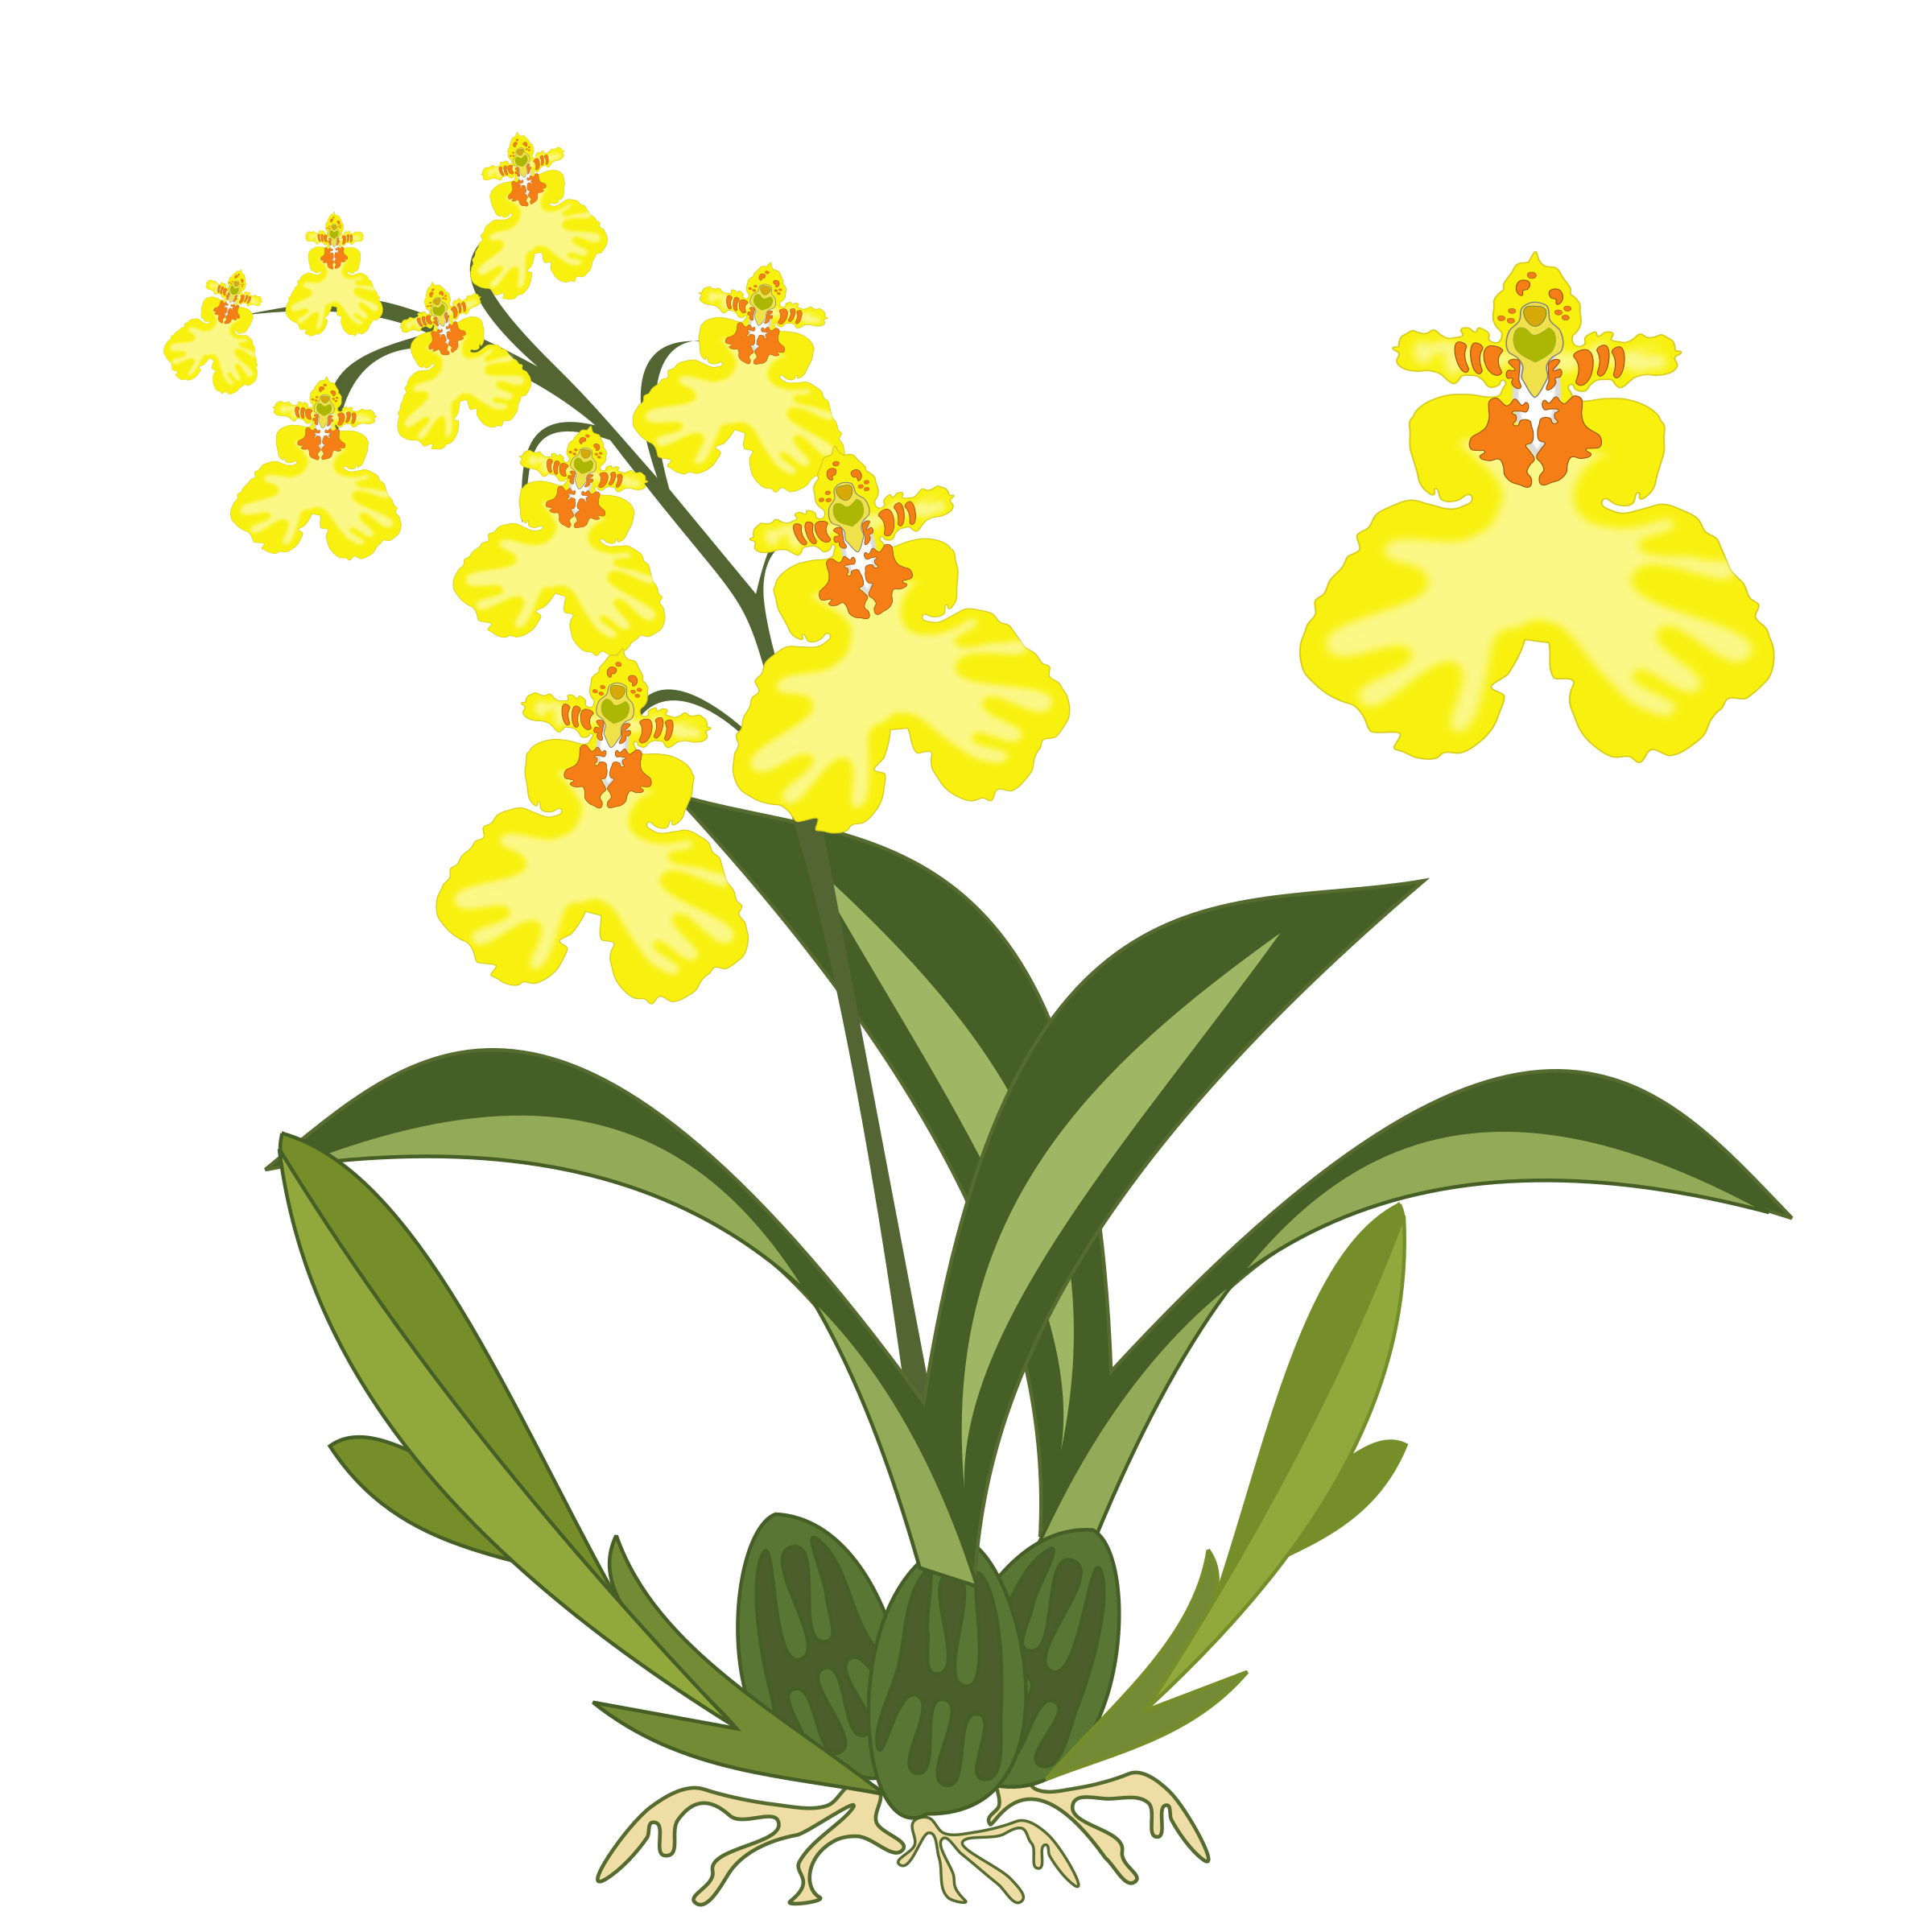 Orchid yellow